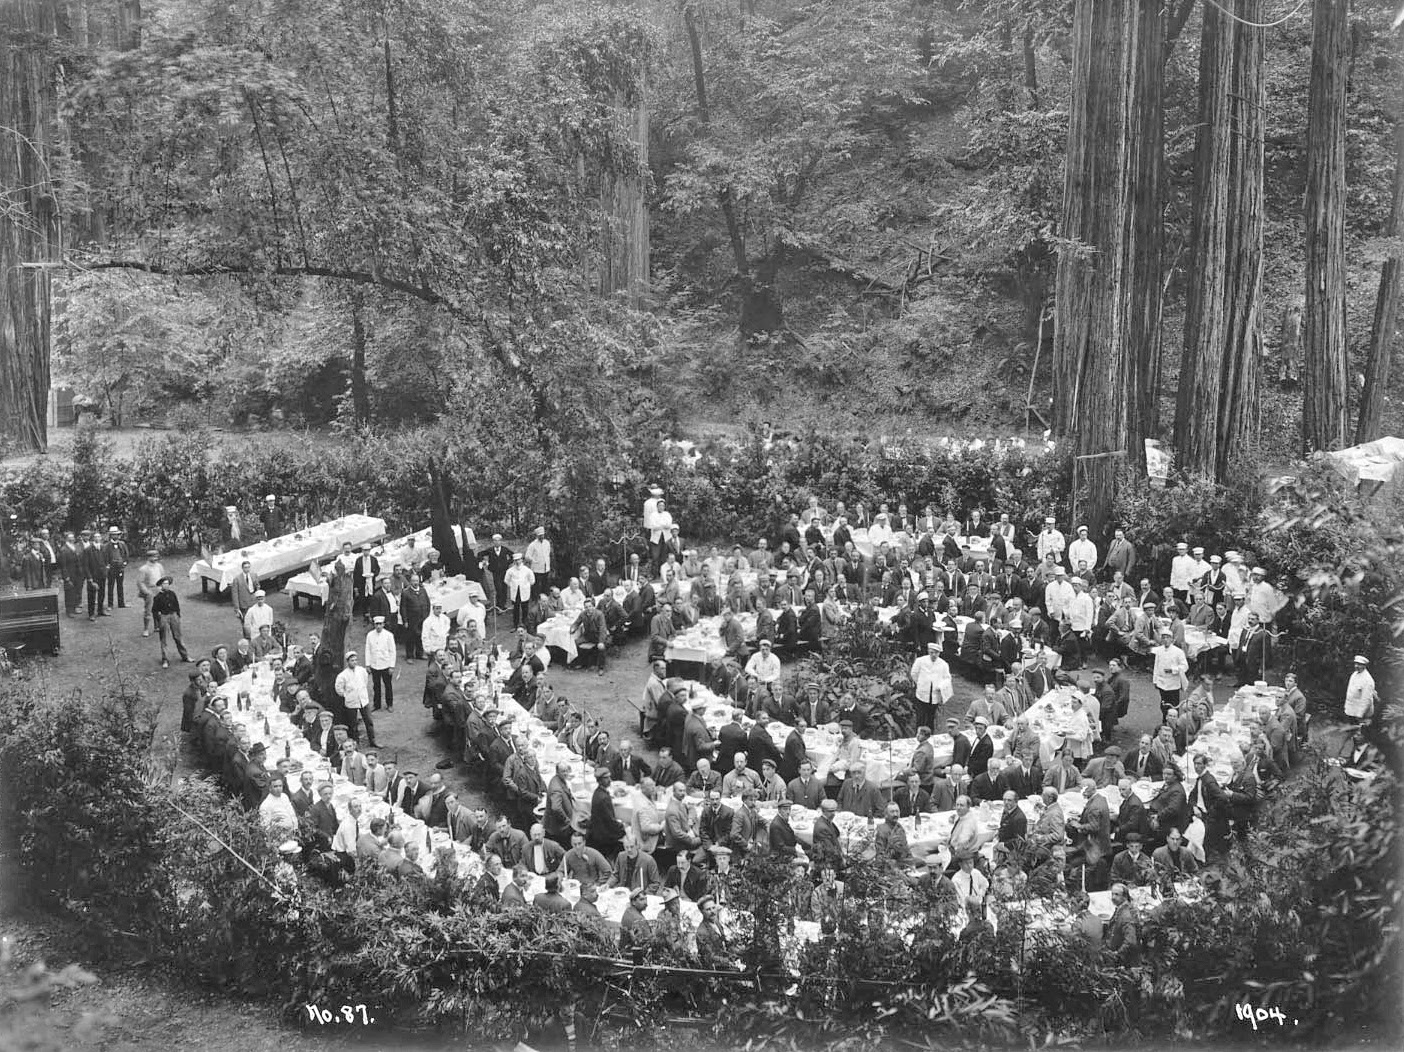 Bohemian Grove Goes On, but Days of Protest Fade - The New 